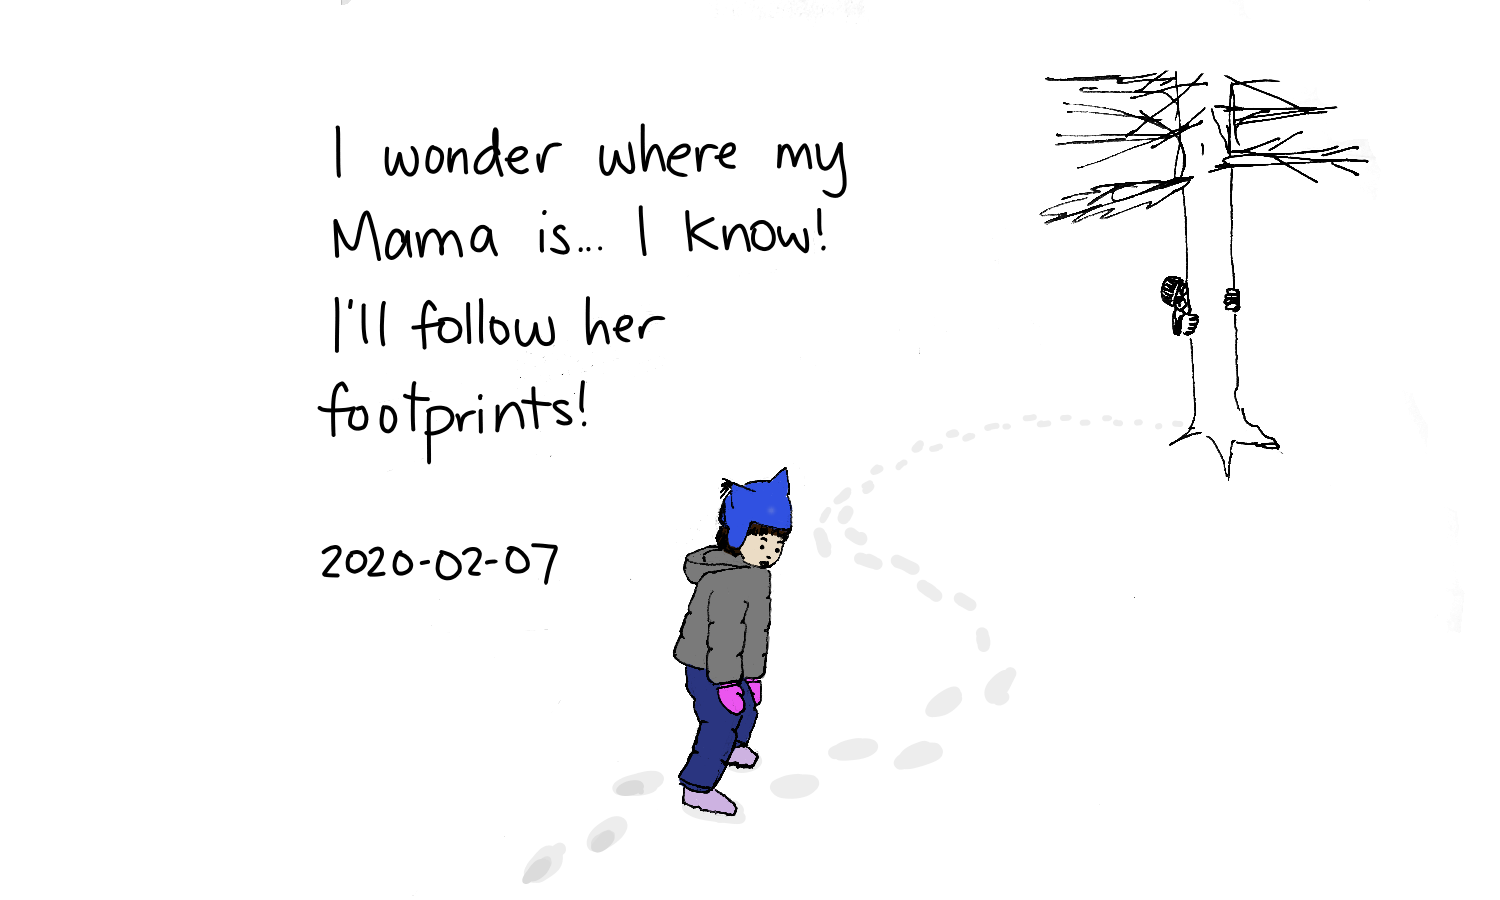 2020-02-07 Tracking my footprints in the snow #moment #sketch.png